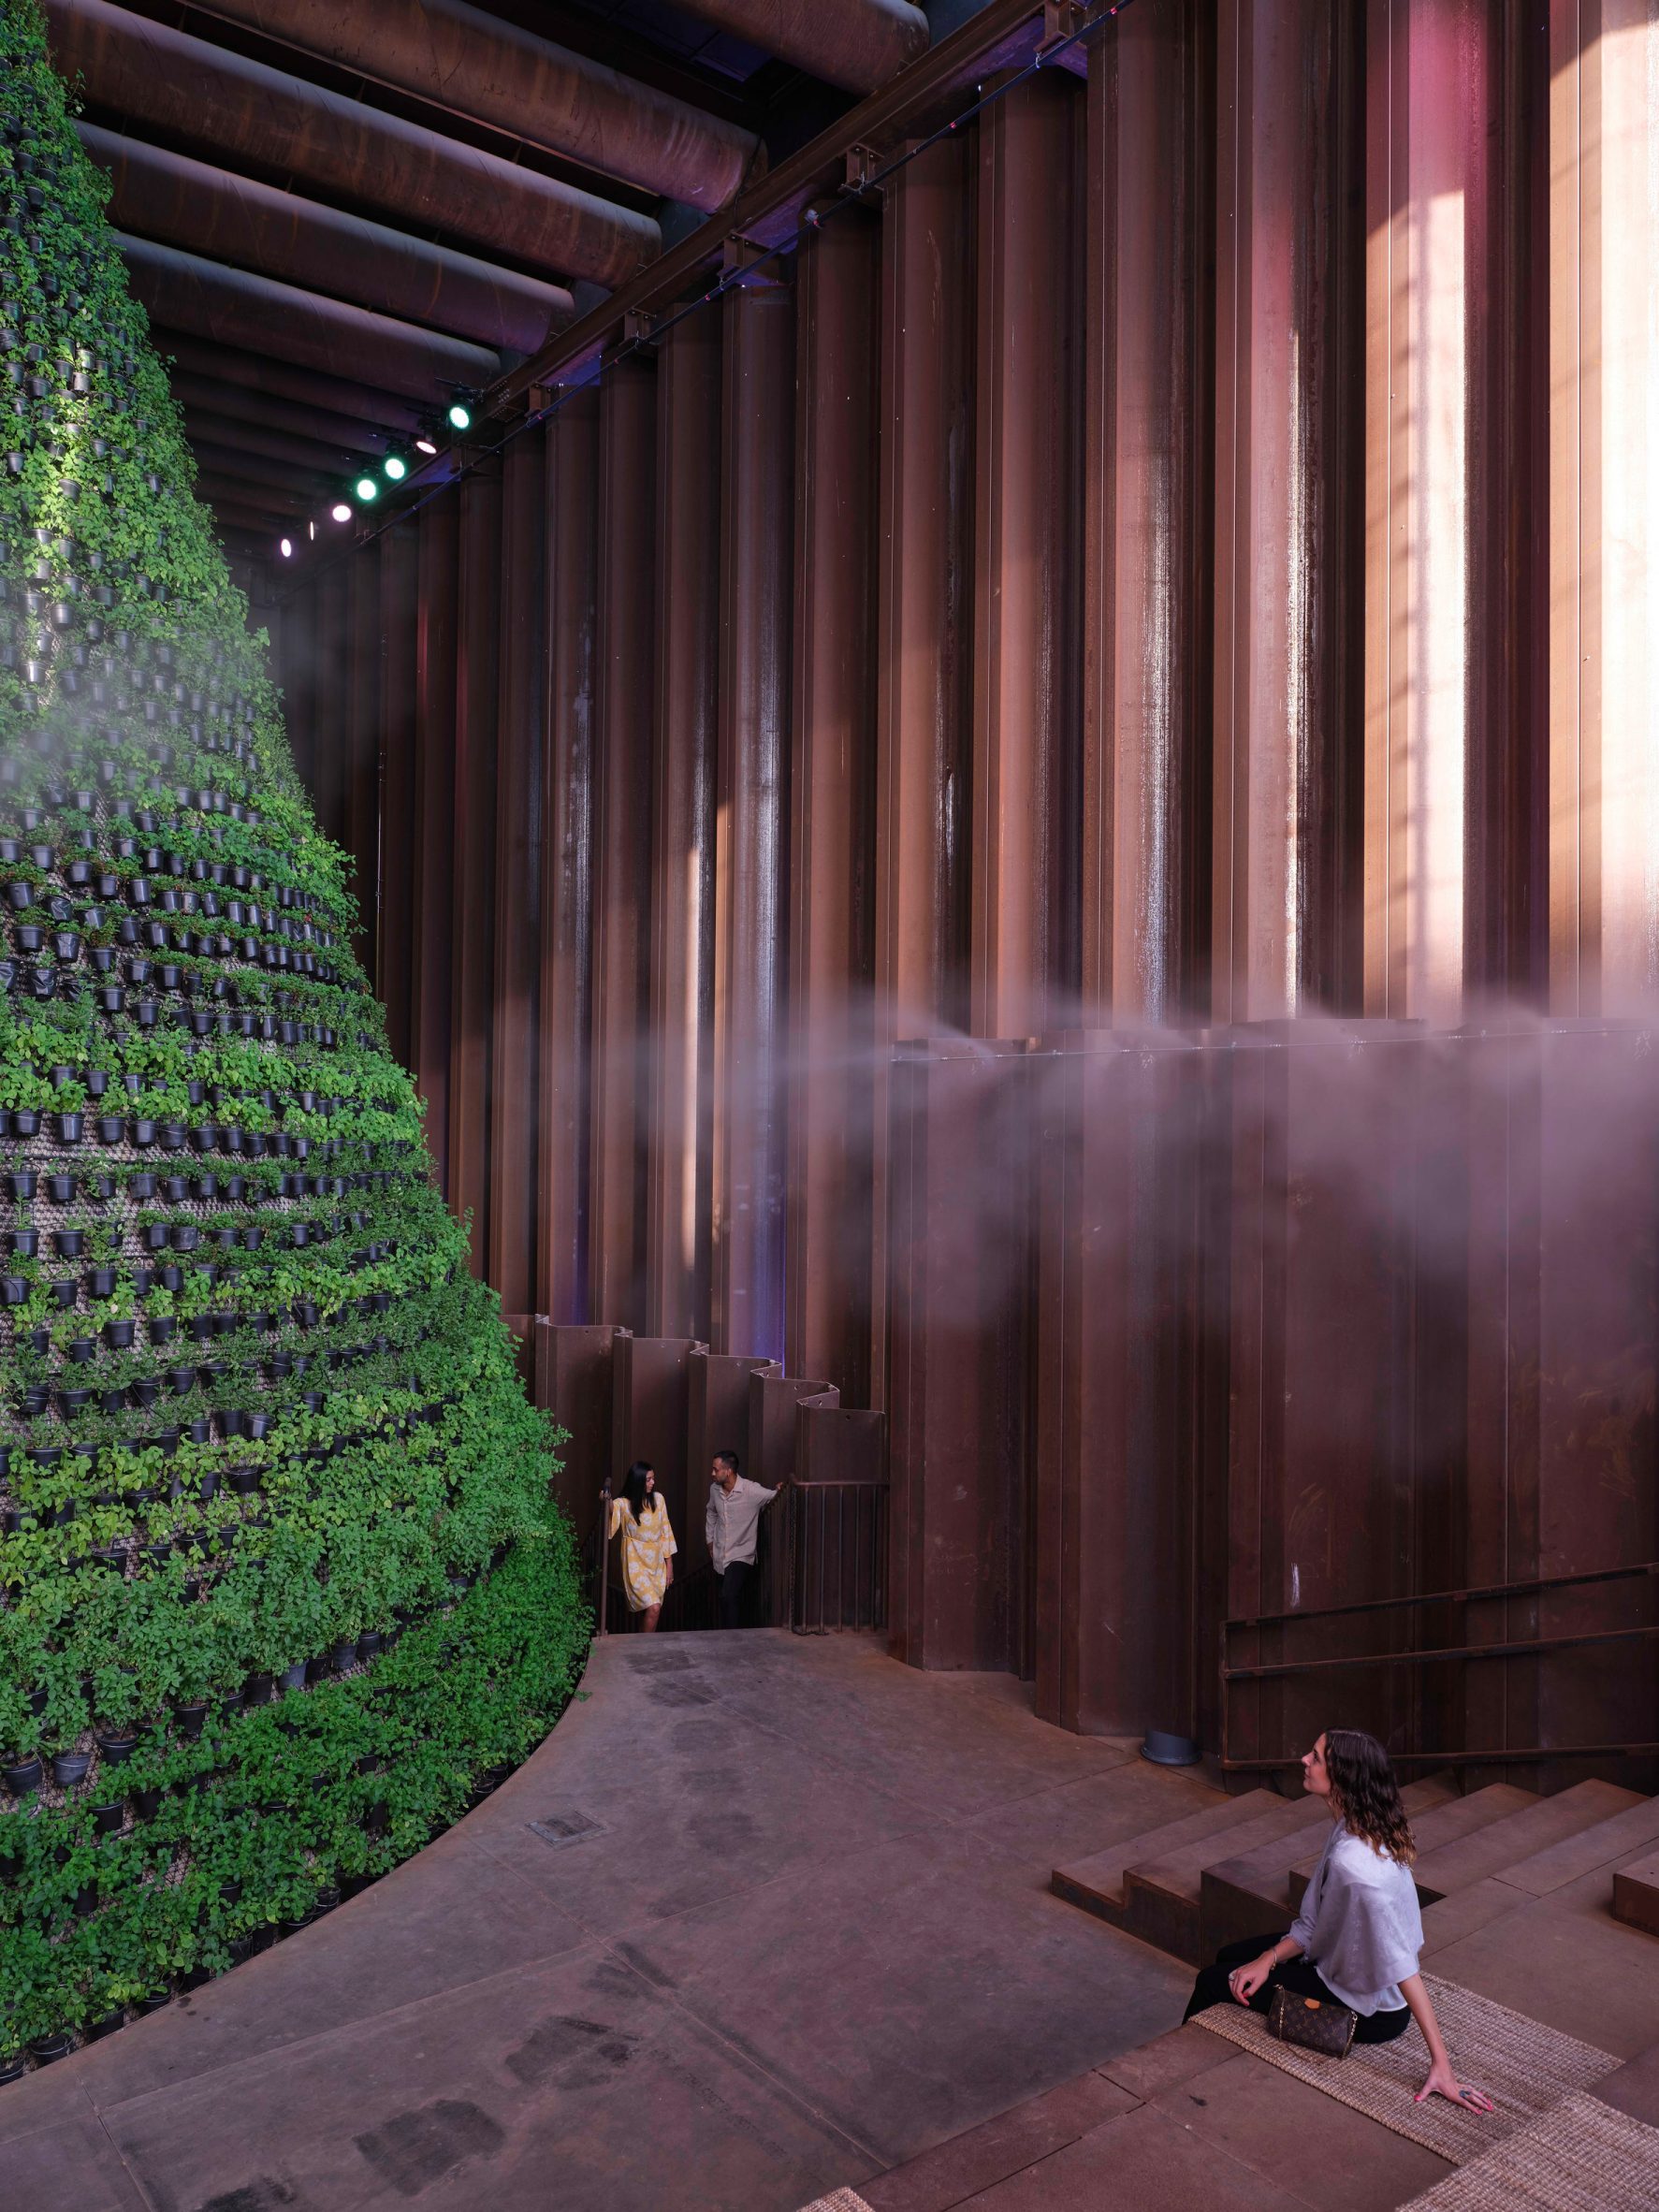 Water misting over a conical garden inside the Dutch Biotope pavilion